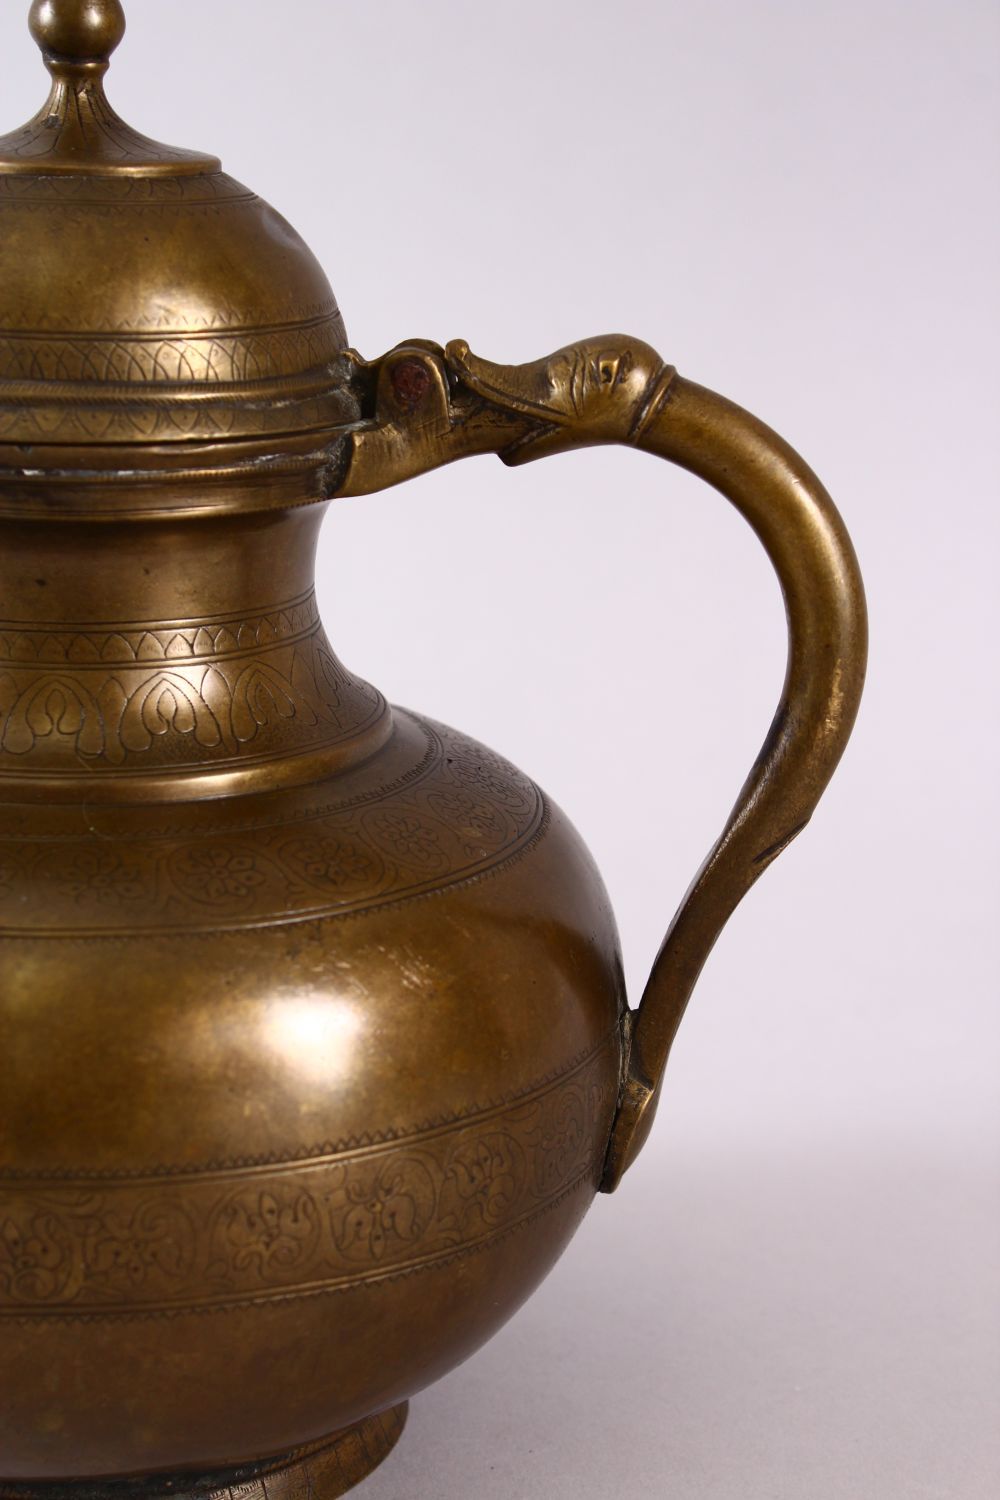 AN 18TH CENTURY MUGHAL INDIAN BRASS EWER, with animal formed handle and spout, 22cm high. - Image 2 of 6